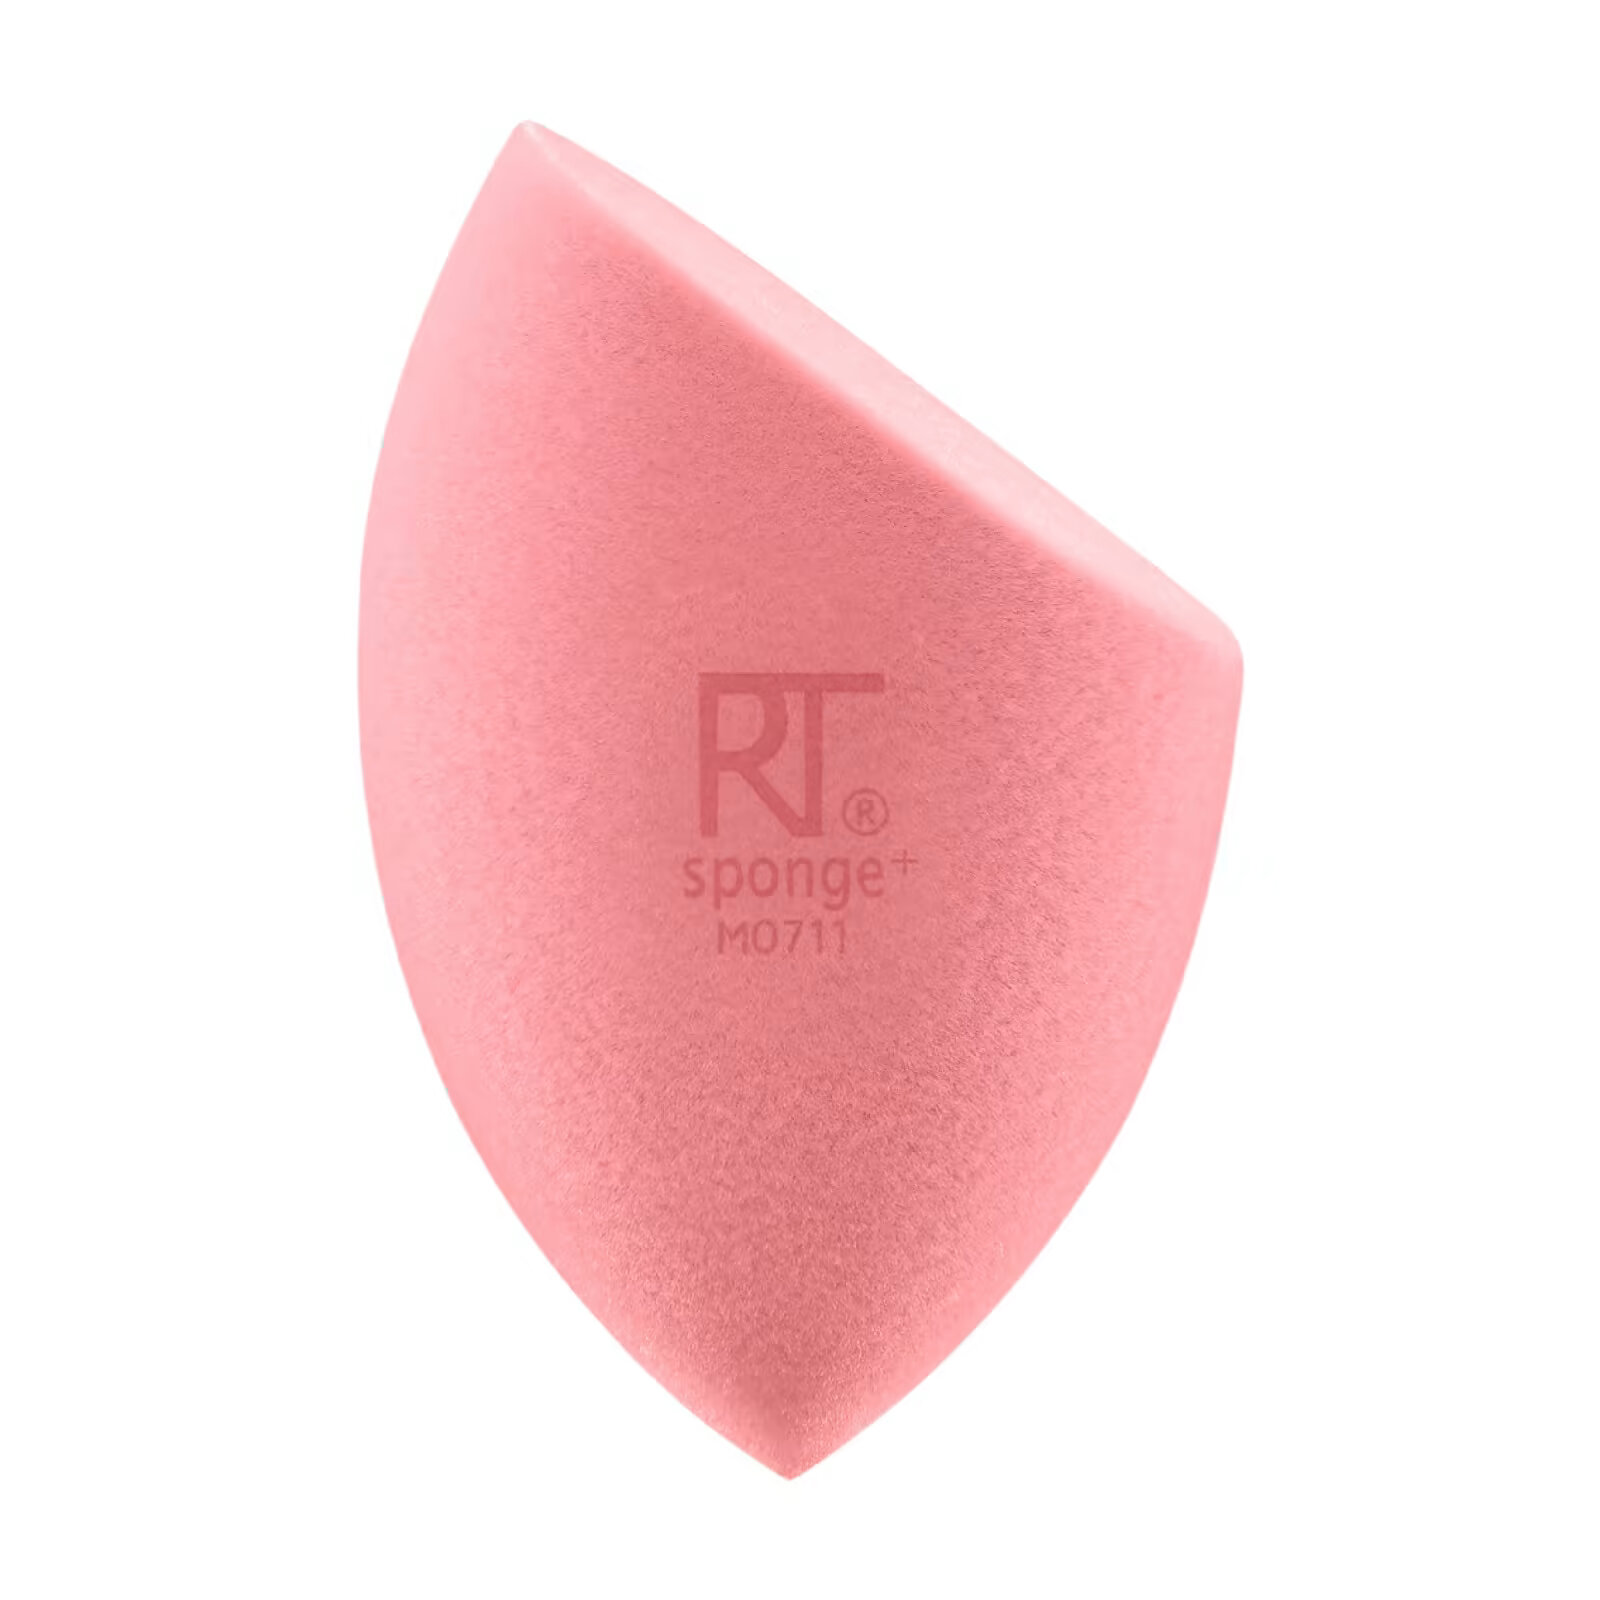 Real Techniques, Miracle Powder Sponge, 1 спонж real techniques miracle powder sponge 1 спонж